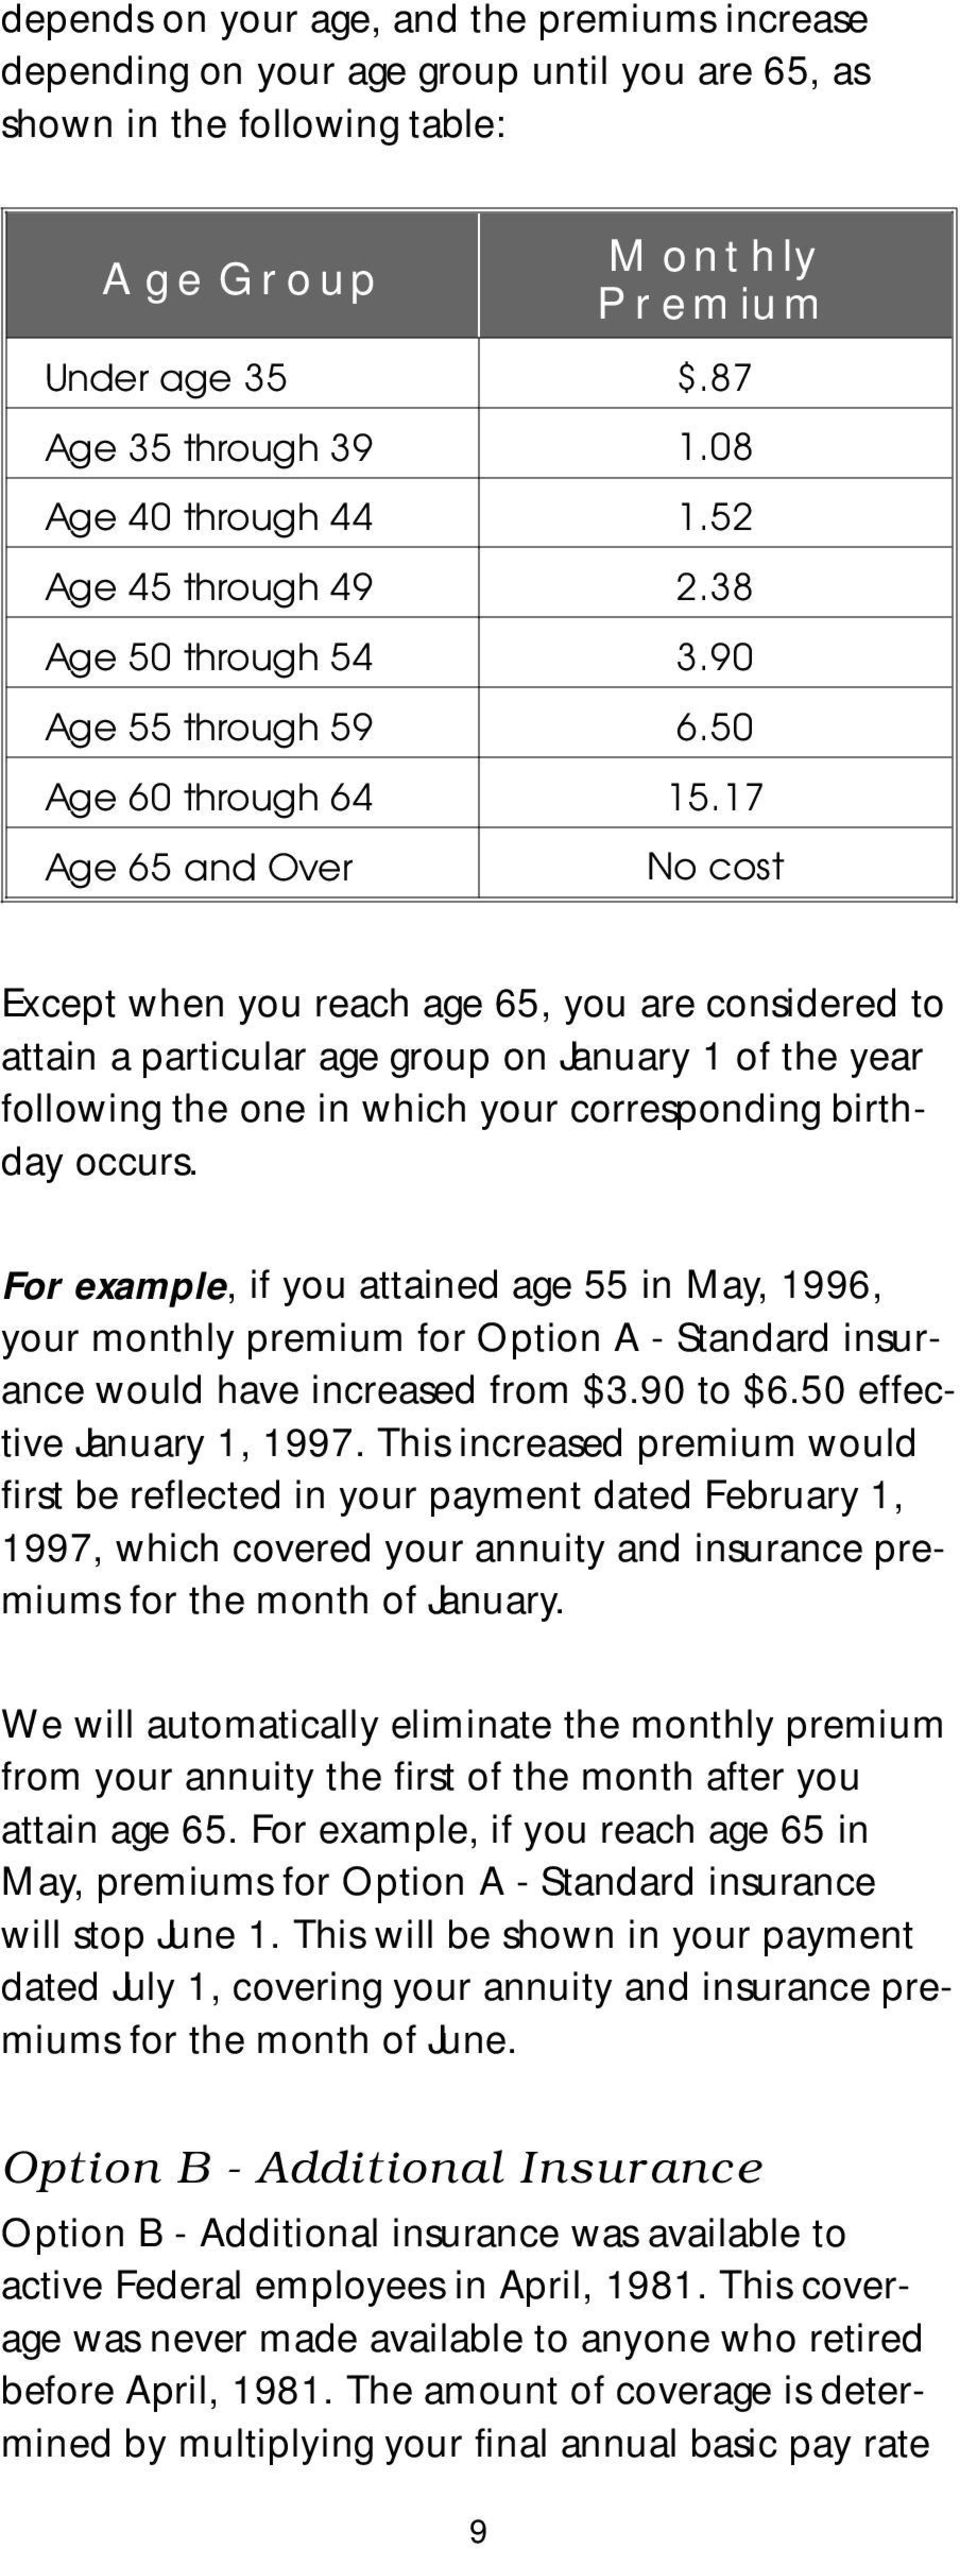 17 Age 65 and Over No cost Except when you reach age 65, you are considered to attain a particular age group on January 1 of the year following the one in which your corresponding birthday occurs.